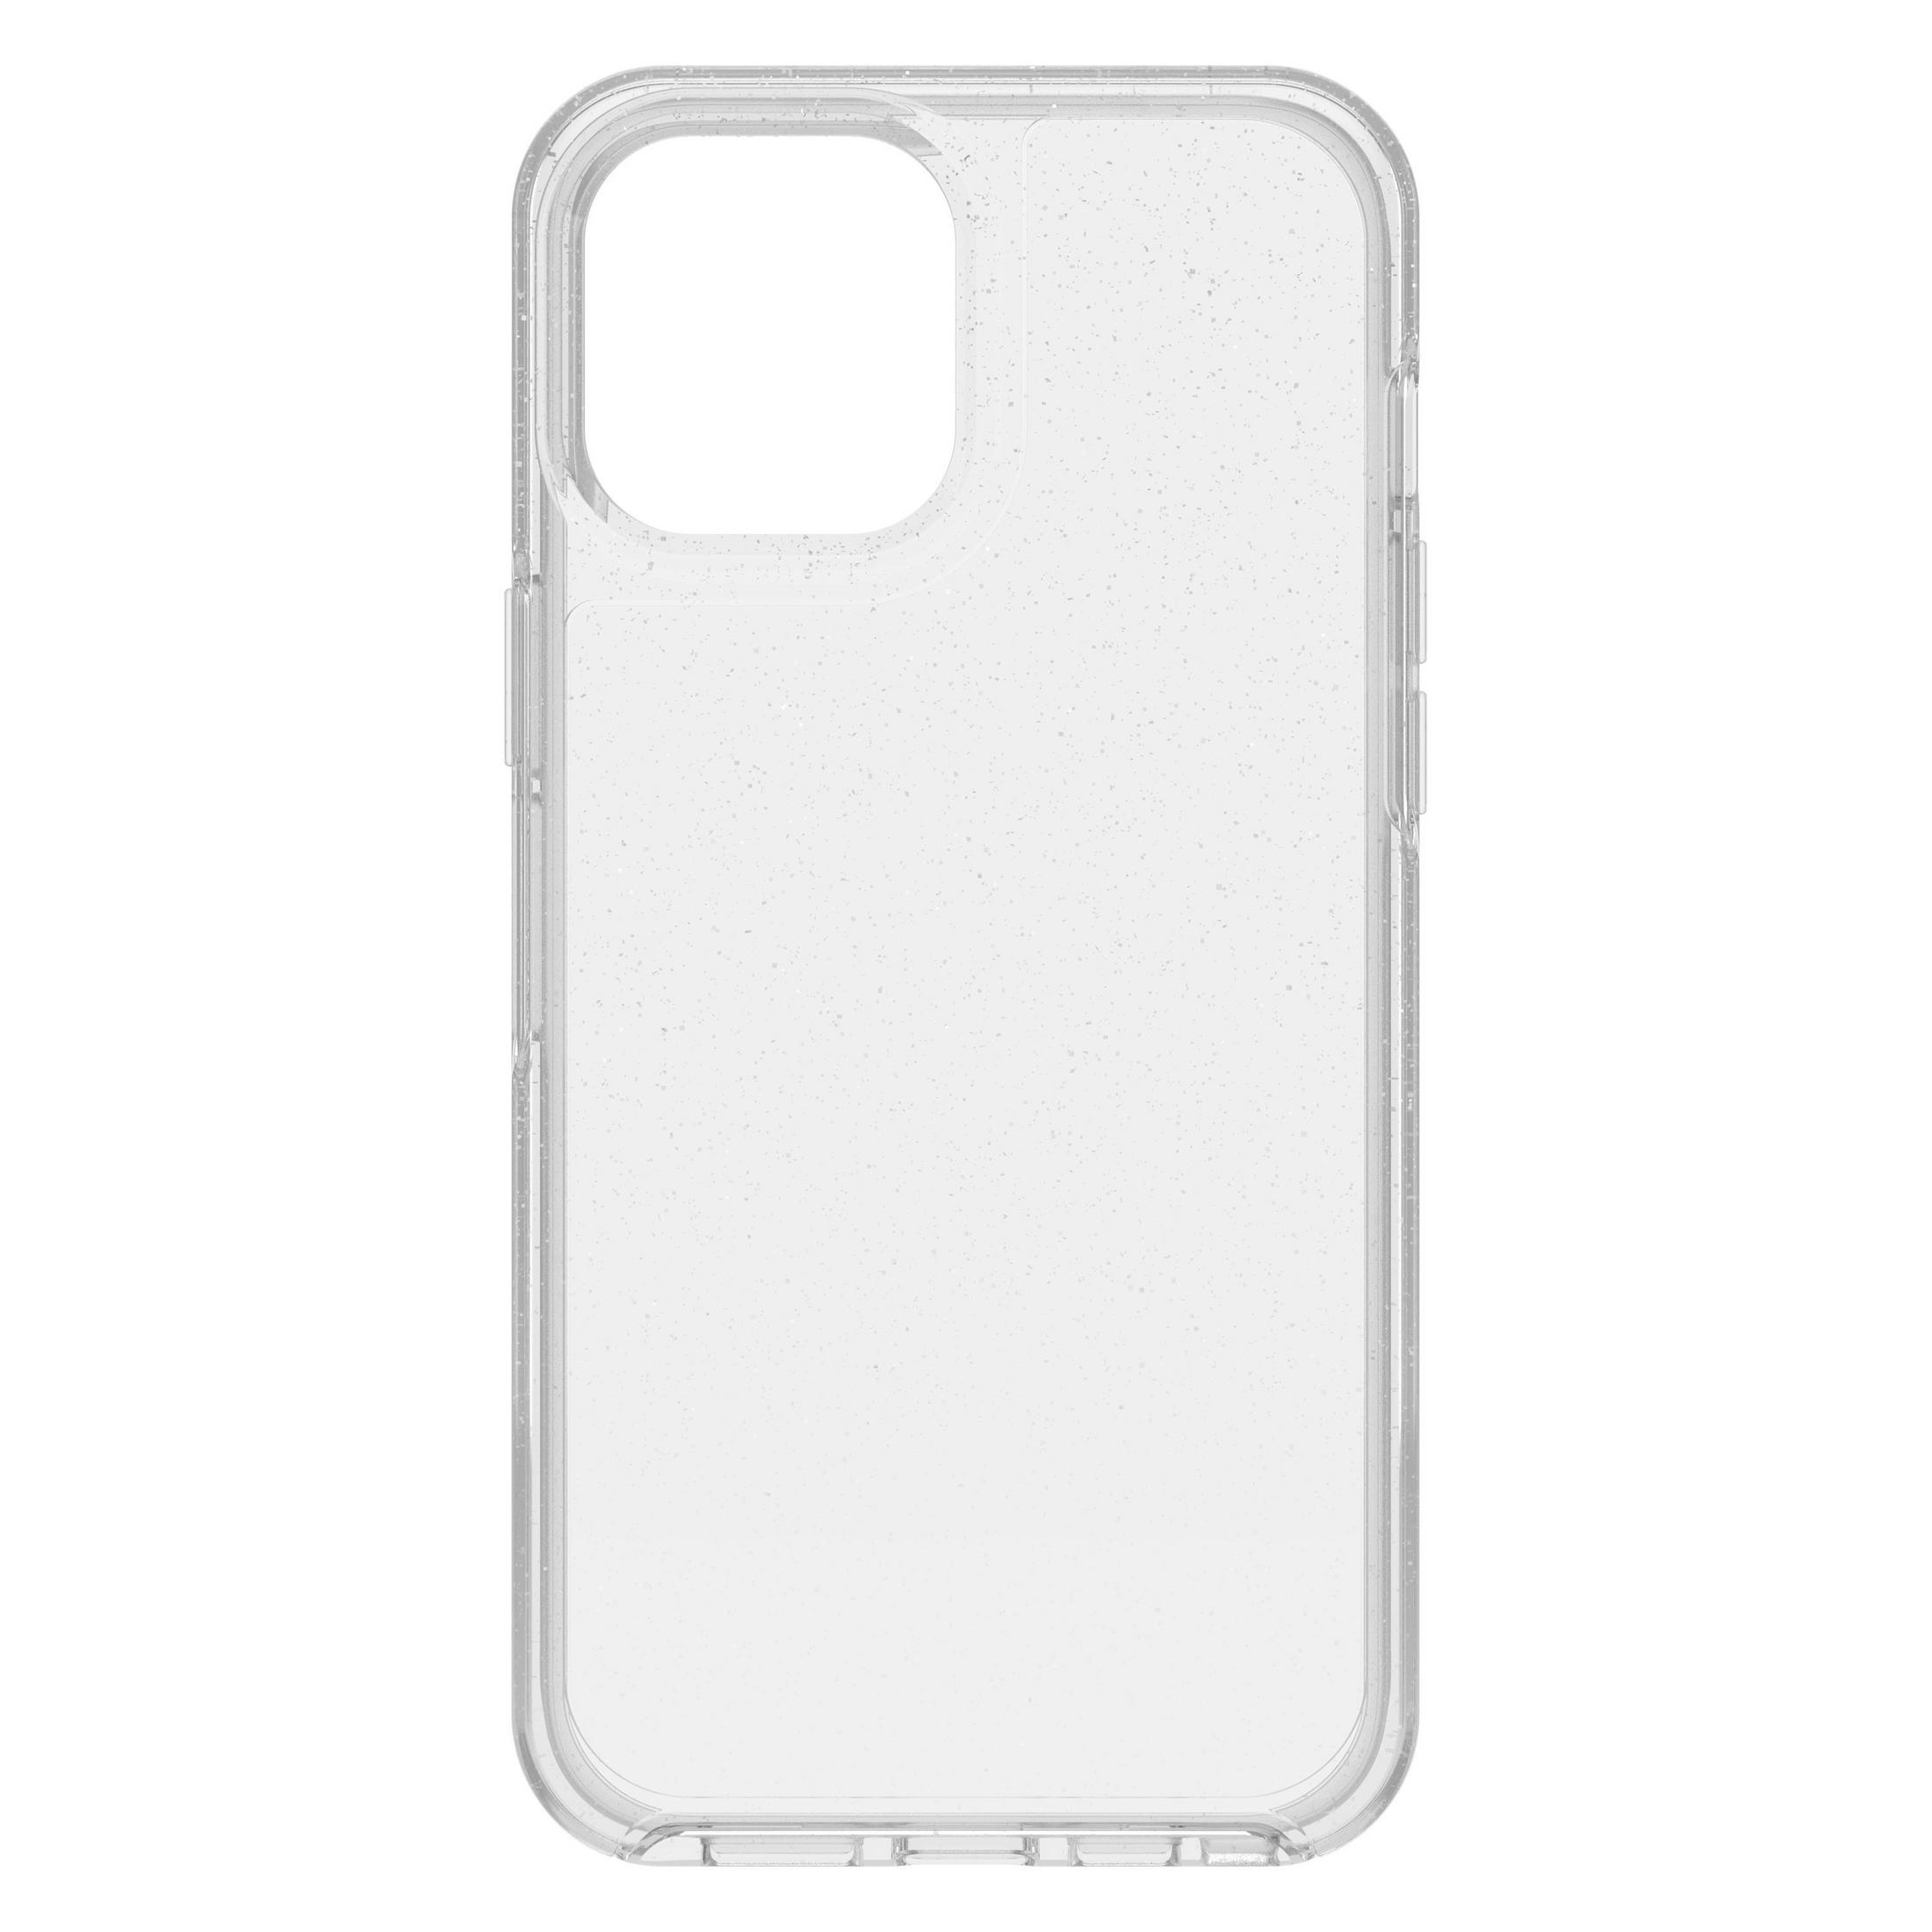 12 77-65471 12 SYMMETRY Apple, iPhone CL., STARDUST CLEAR PRO MAX OTTERBOX IP Pro Transparent/Glitzer Max, Backcover,